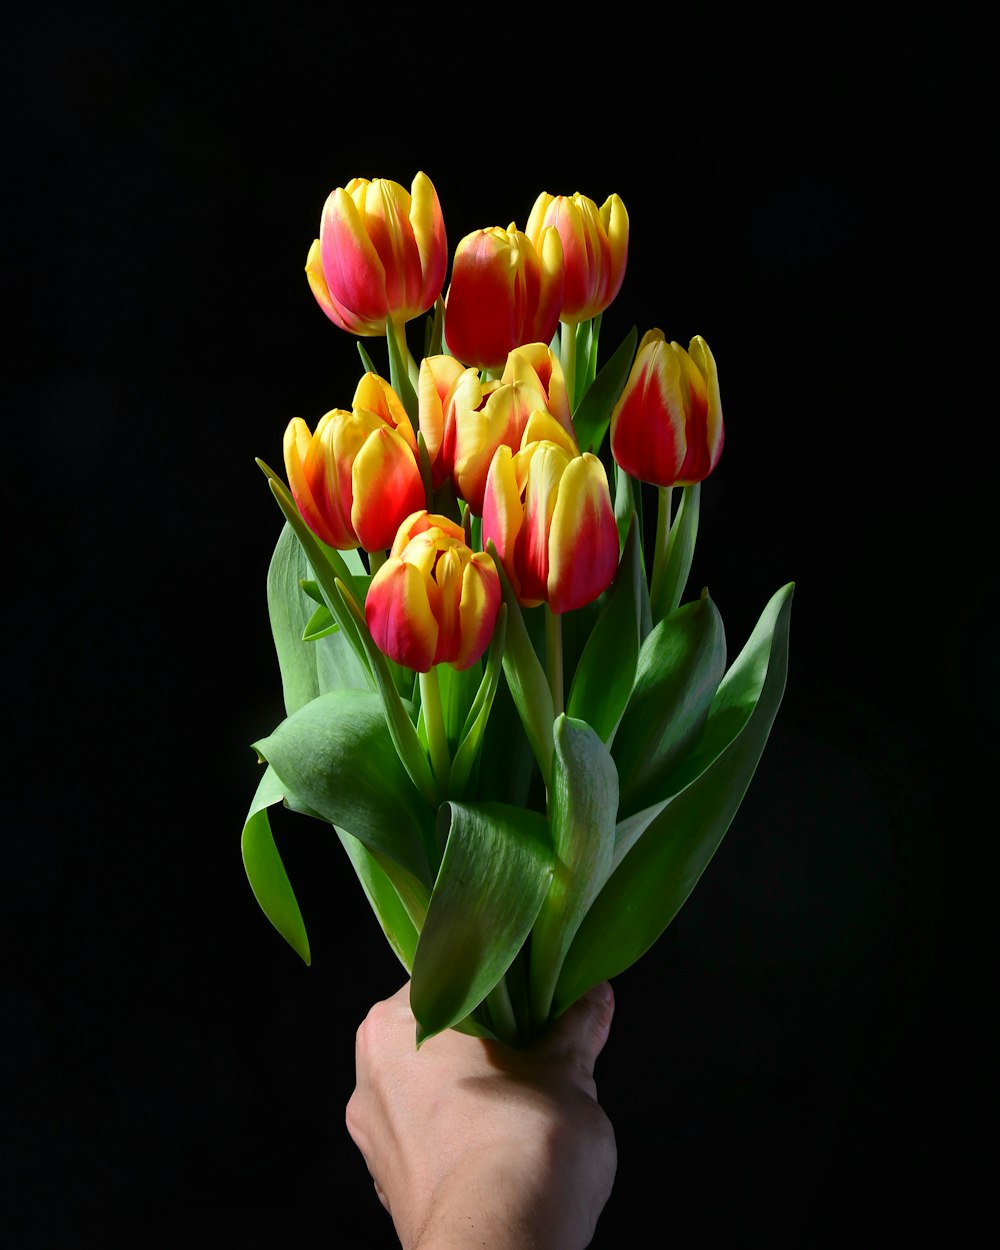 person holding yellow-and-red tulip flowers